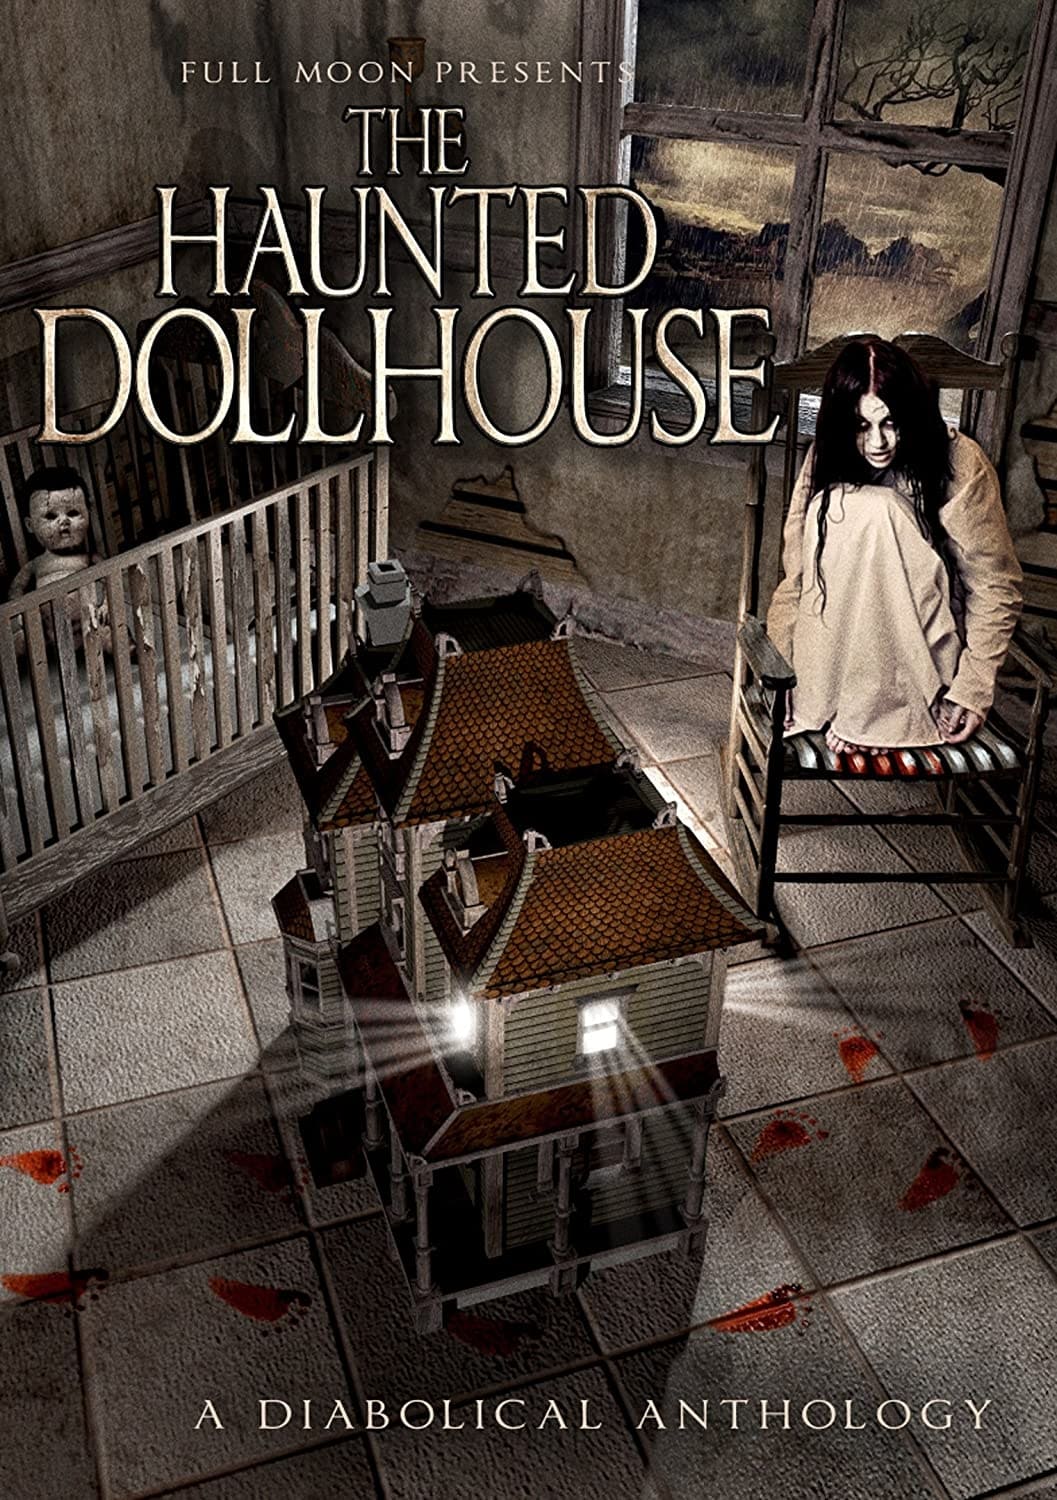 The Haunted Dollhouse (2013)